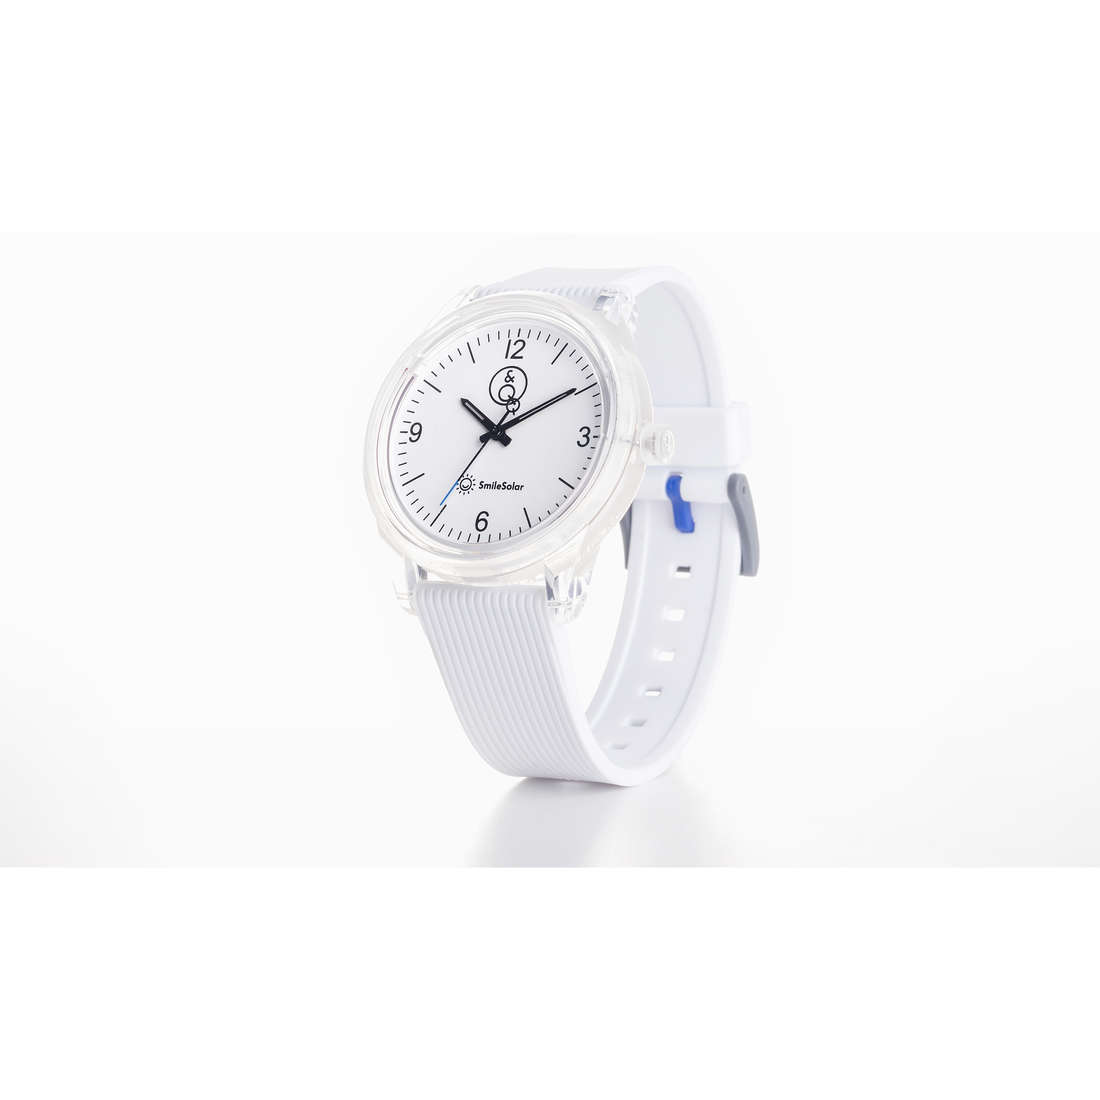 Smile Solar Regular Women's Time-Only Watch